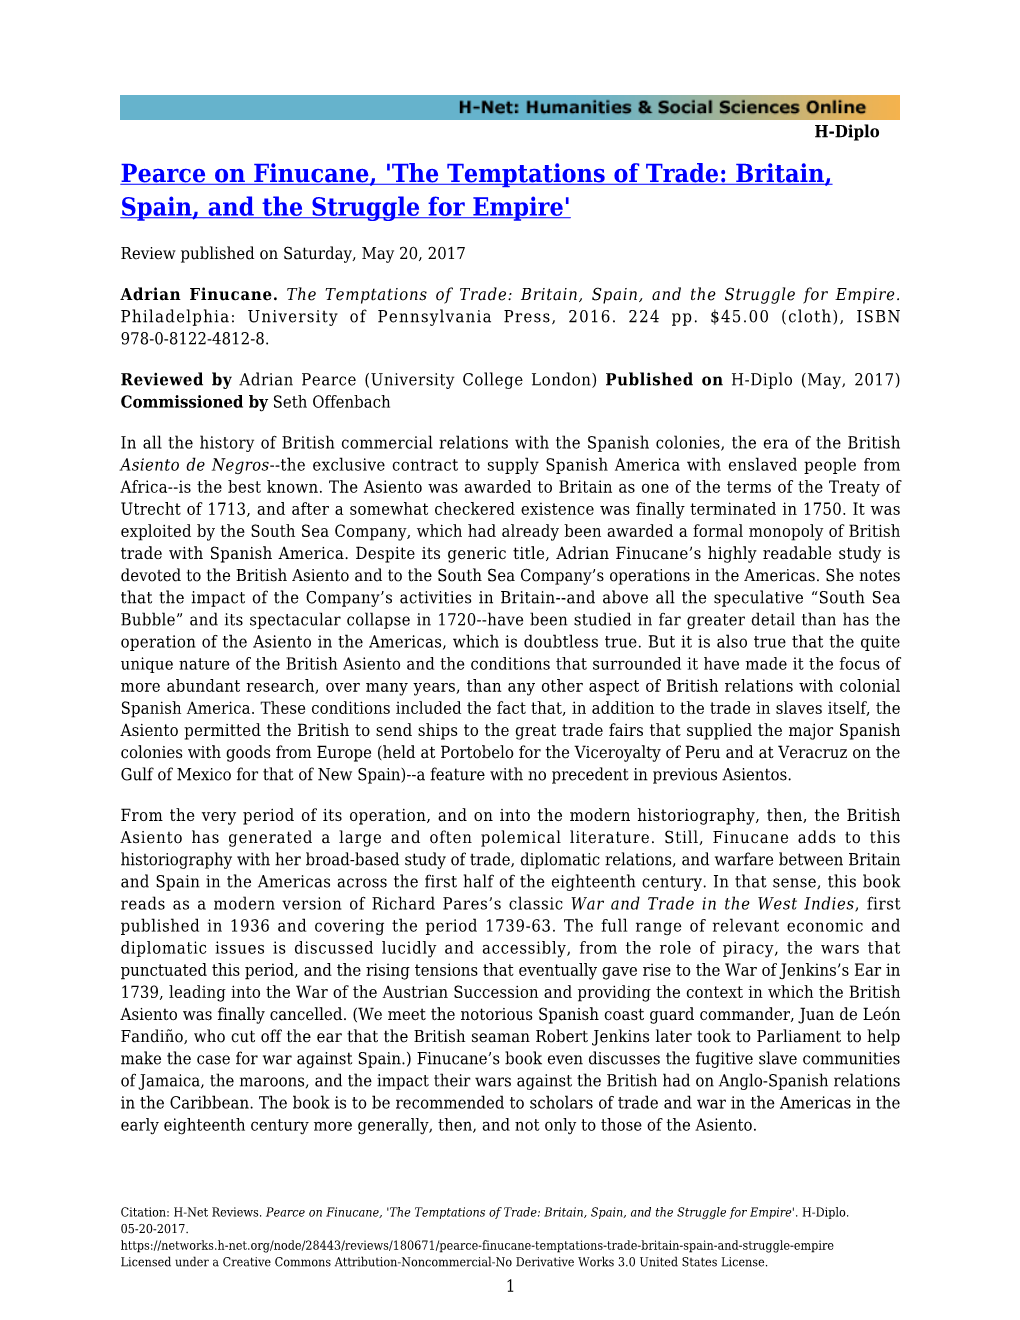 The Temptations of Trade: Britain, Spain, and the Struggle for Empire'